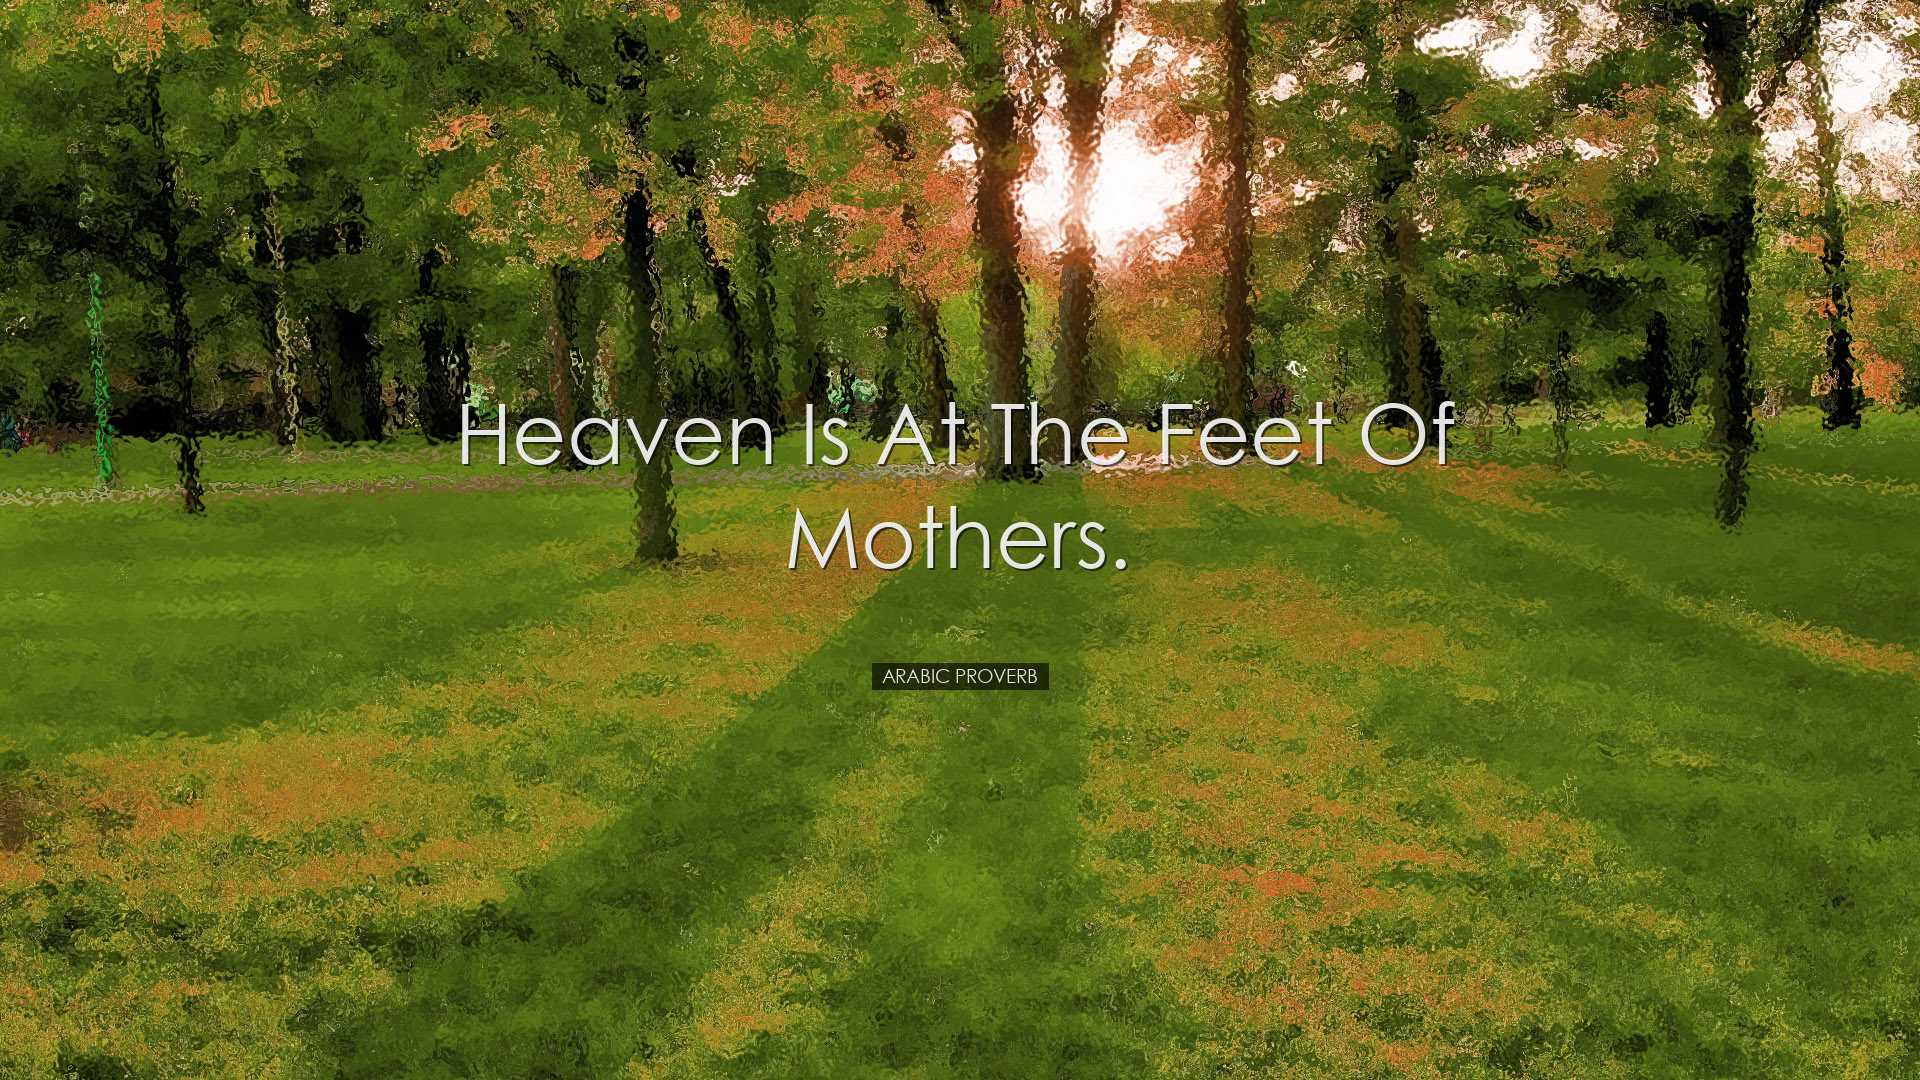 Heaven is at the feet of Mothers. - Arabic Proverb